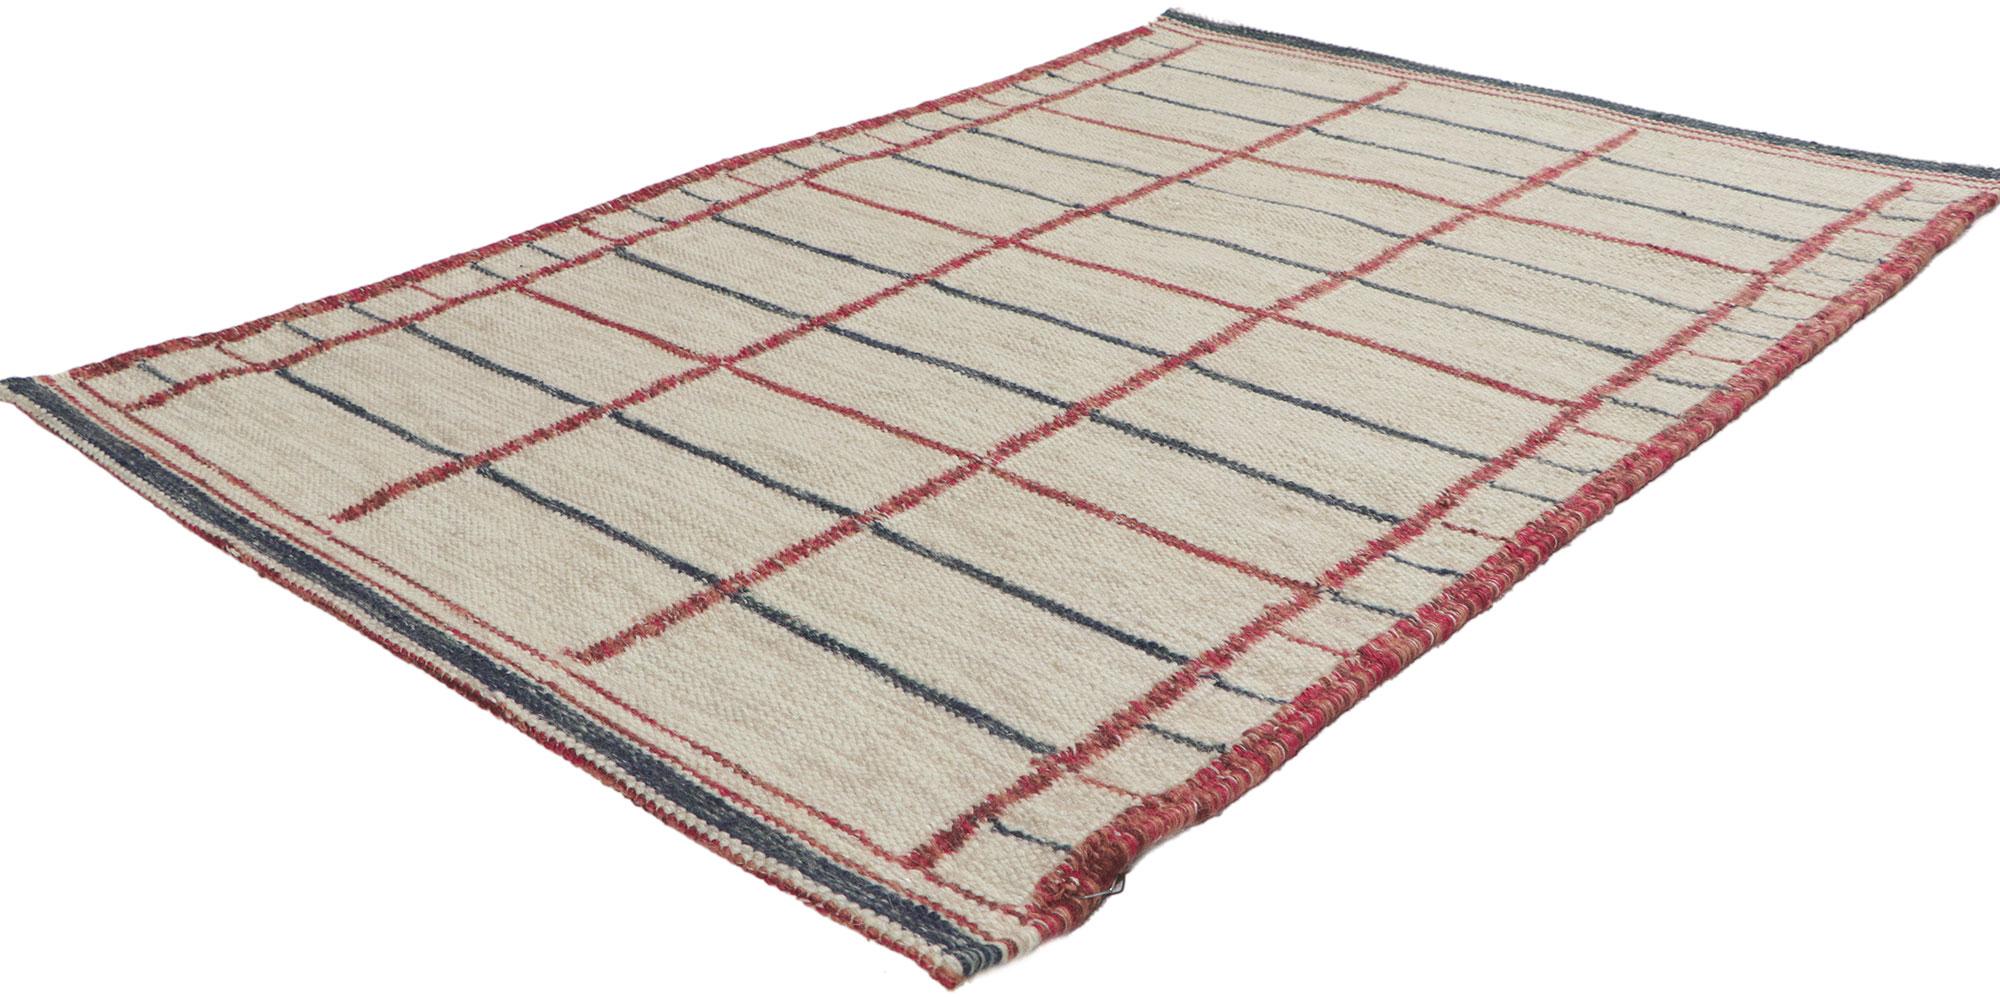 30807-30808 New matching pair of Swedish inspired Kilim rugs. With its simplicity and linear art form, this hand-woven wool Swedish inspired Kilim rug provides a feeling of cozy contentment without the clutter. The abrashed oatmeal colored field